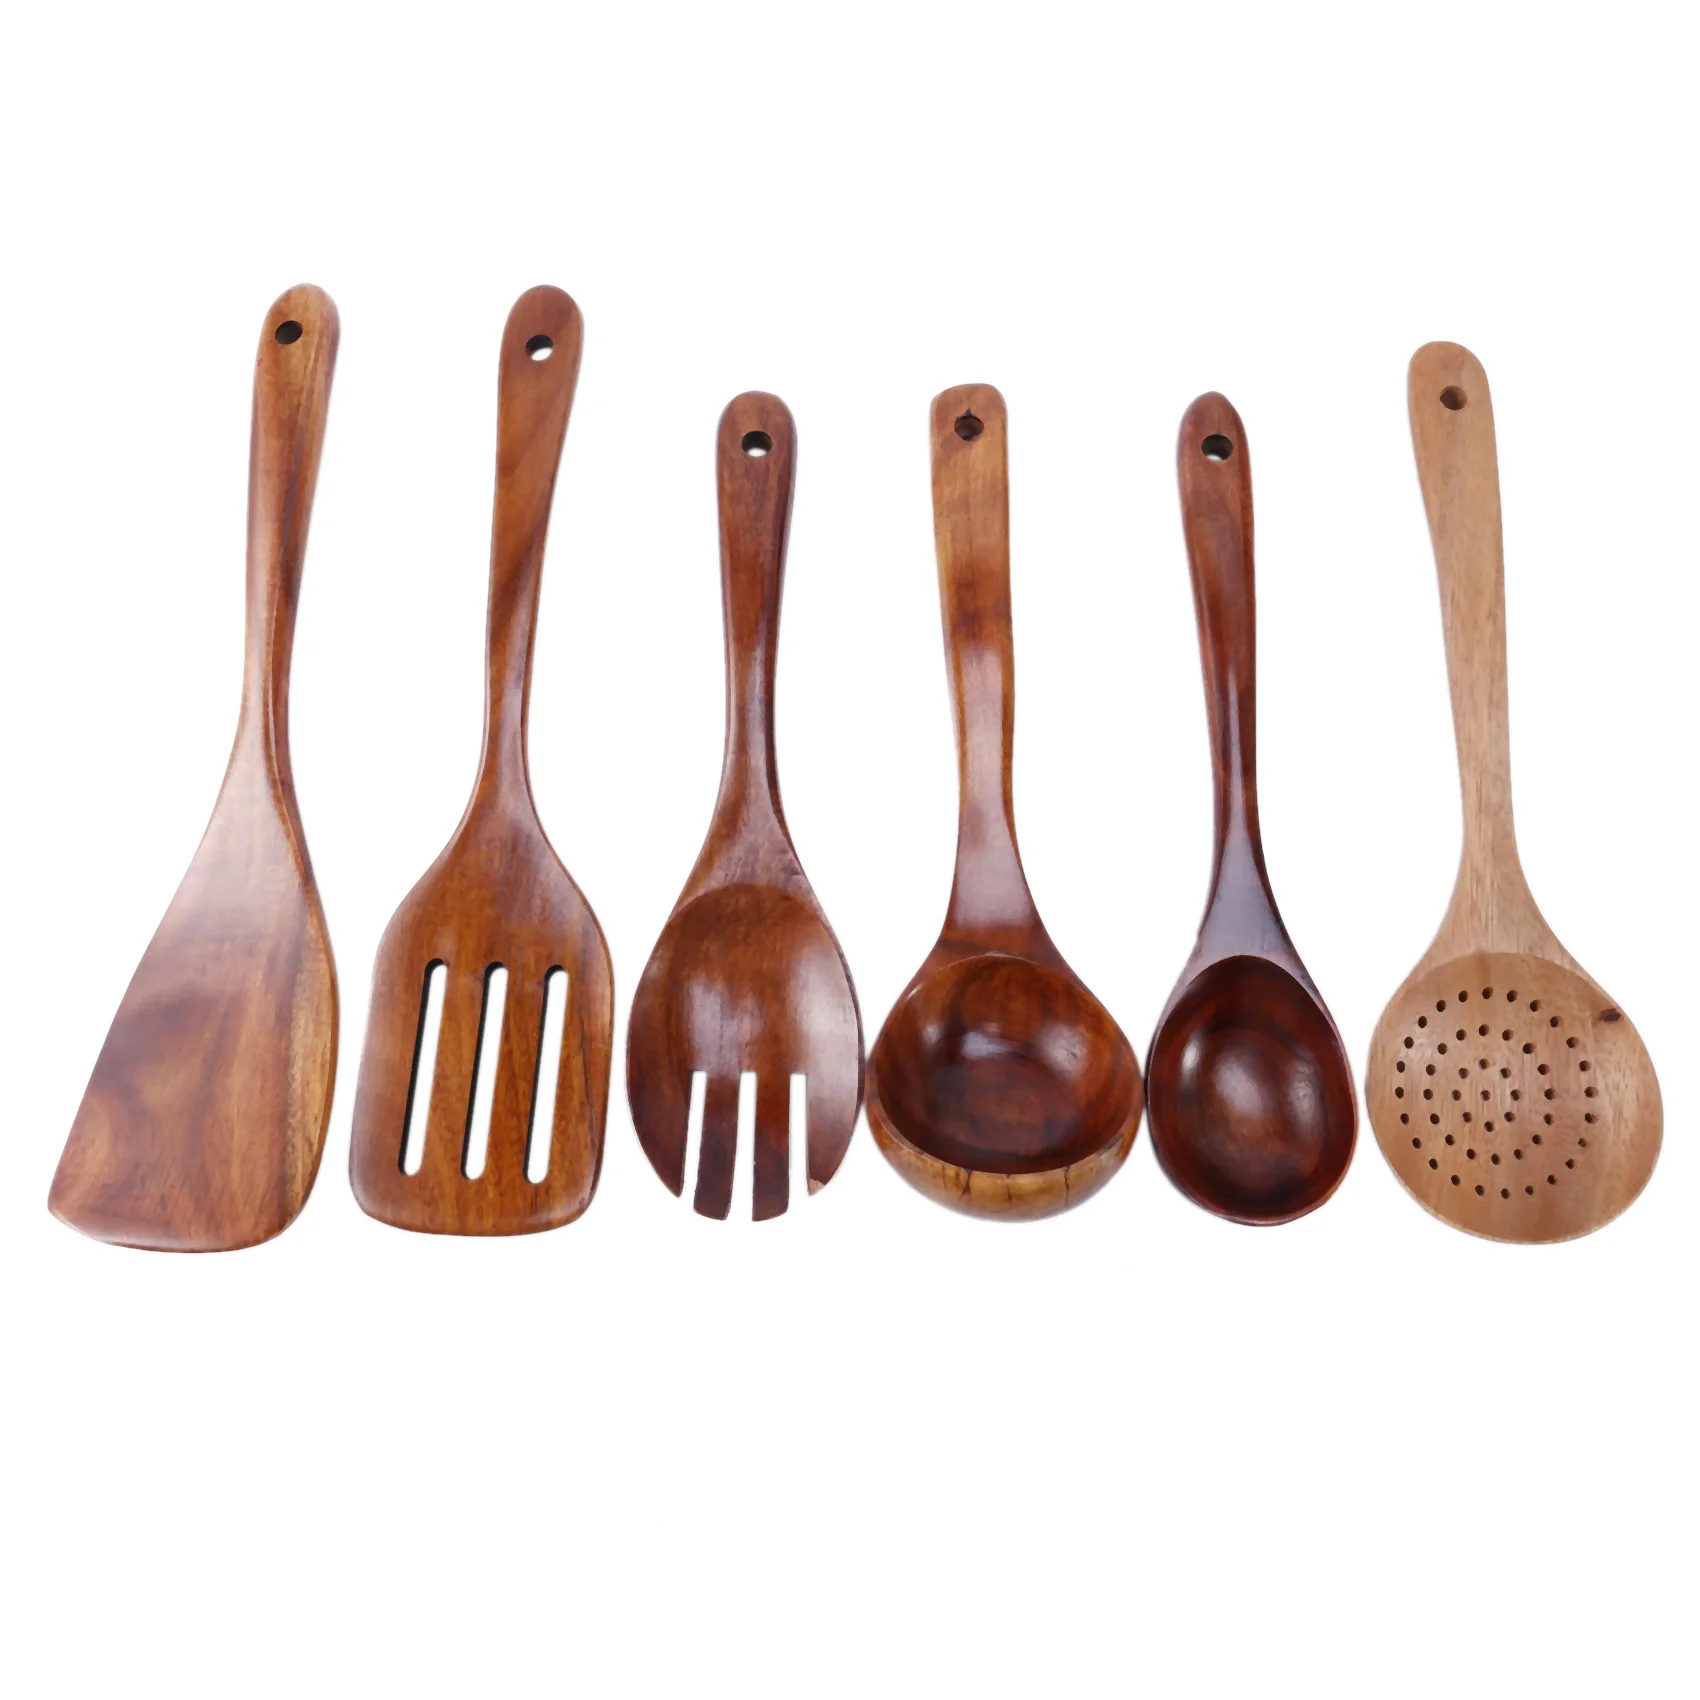 

Wooden Utensils Set of 6 Large Kitchen Cooking Utensil for Non Stick Cookware Natural Teak Wood Spoons Spatula Ladle Colander